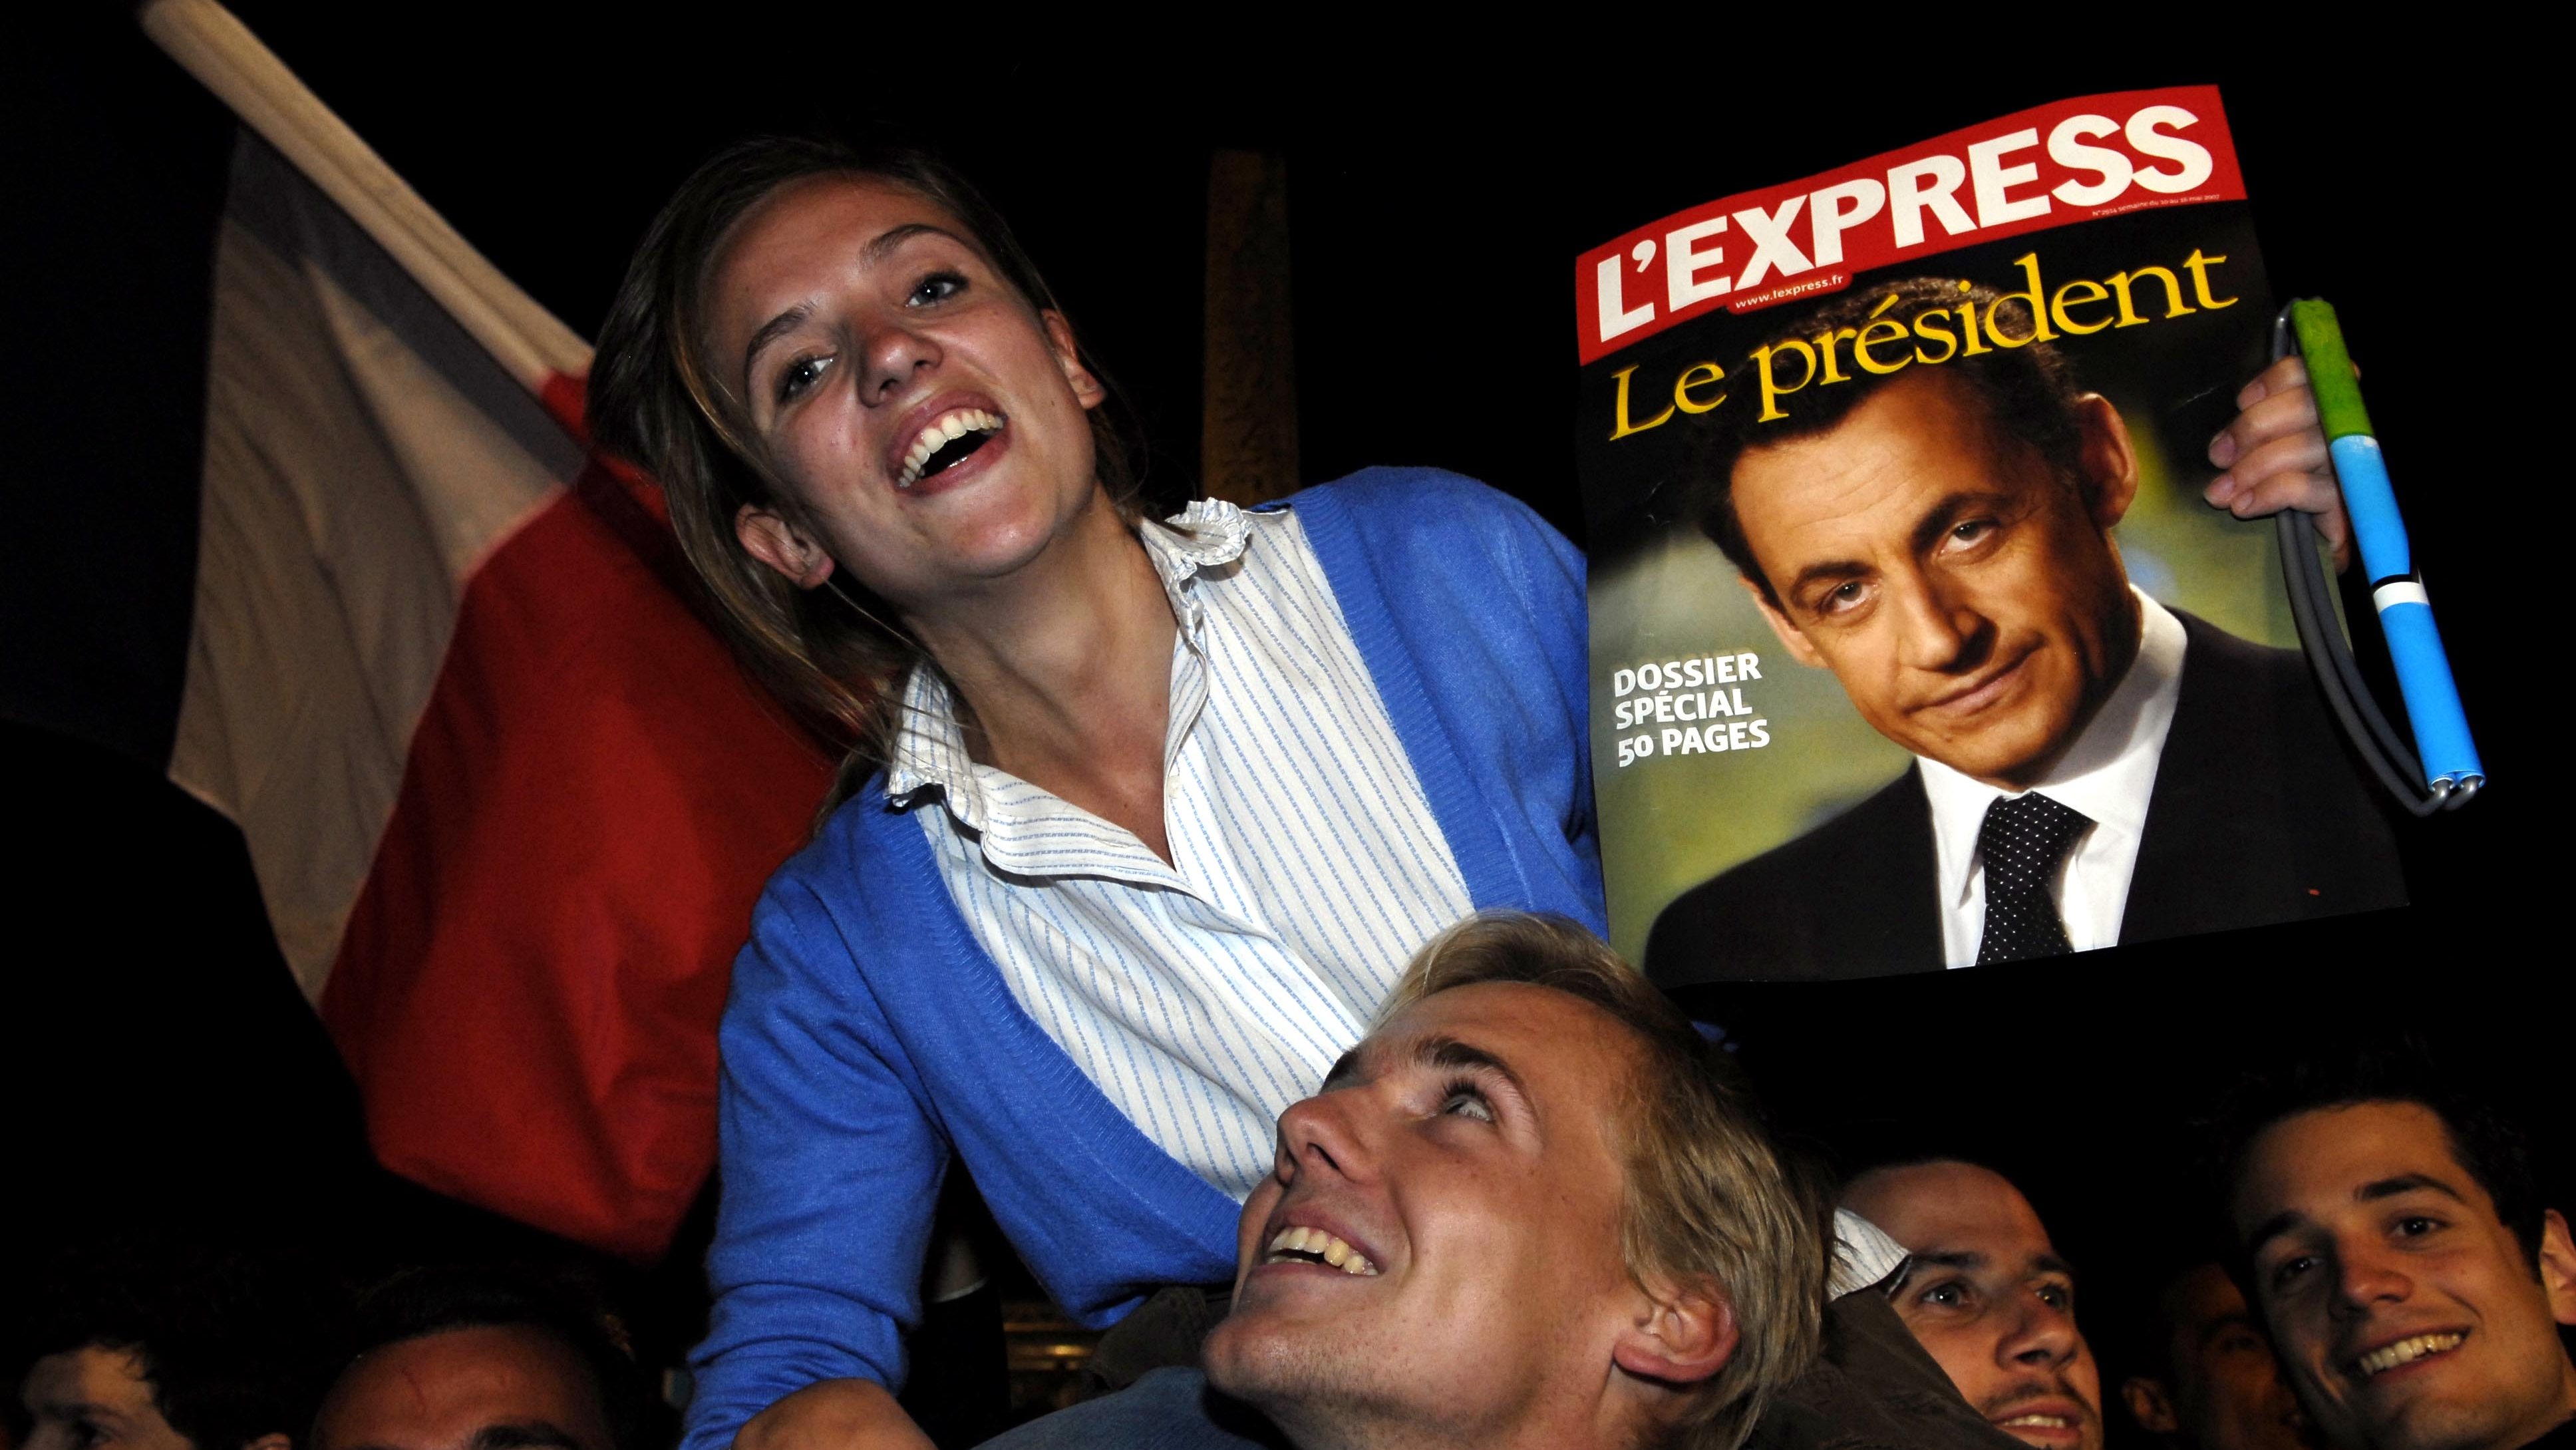 France - Elections - Presidential Candidate Nicolas Sarkozy - Supporters